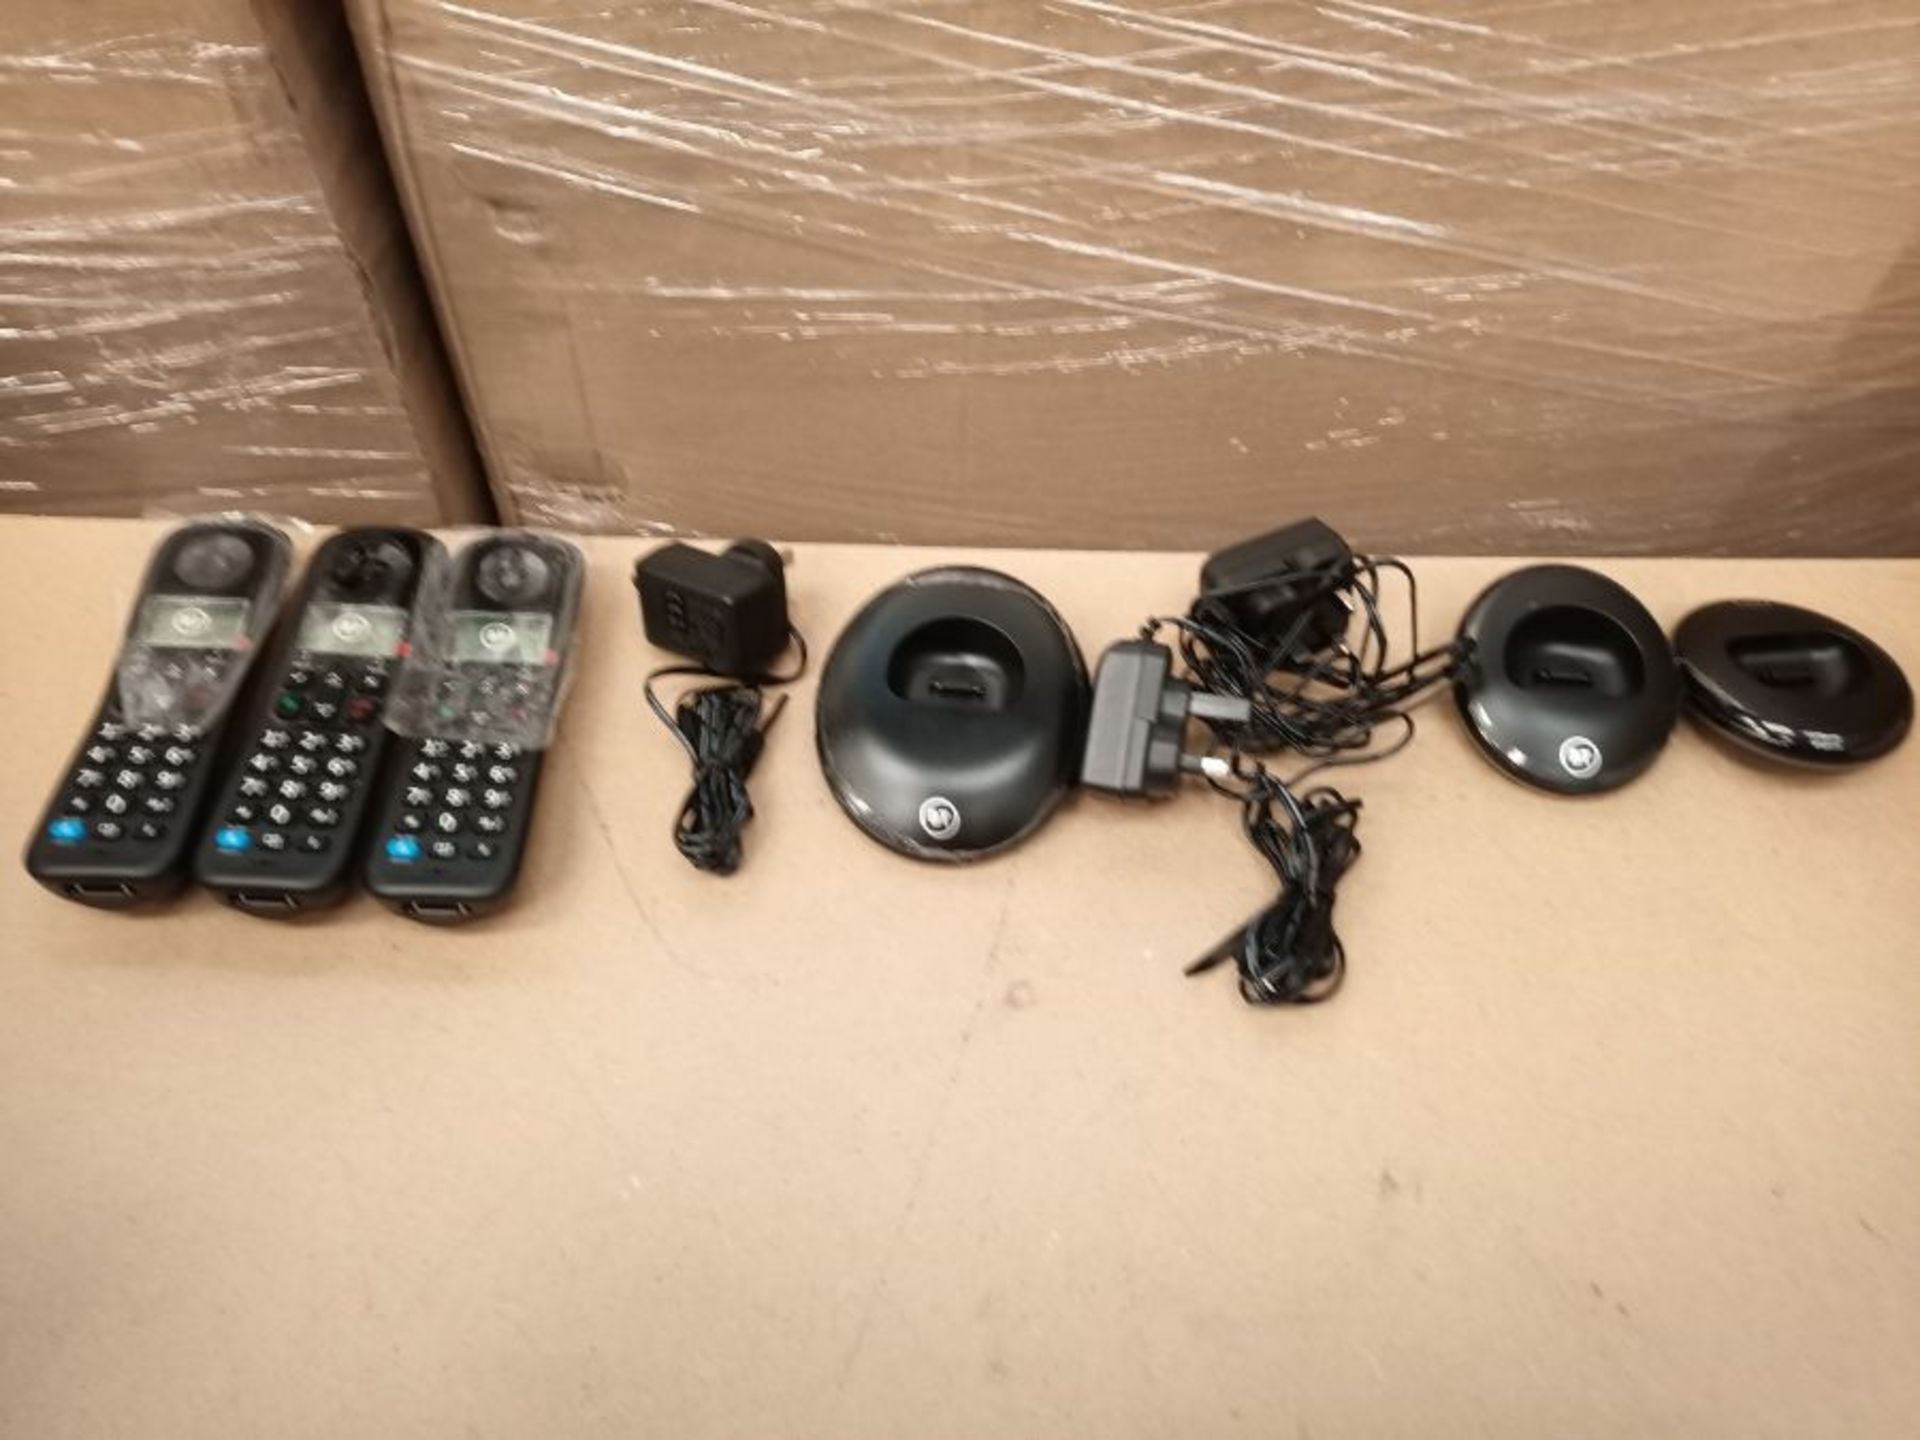 BT Everyday Cordless Home Phone with Basic Call Blocking, Trio Handset Pack, Black - Image 3 of 3